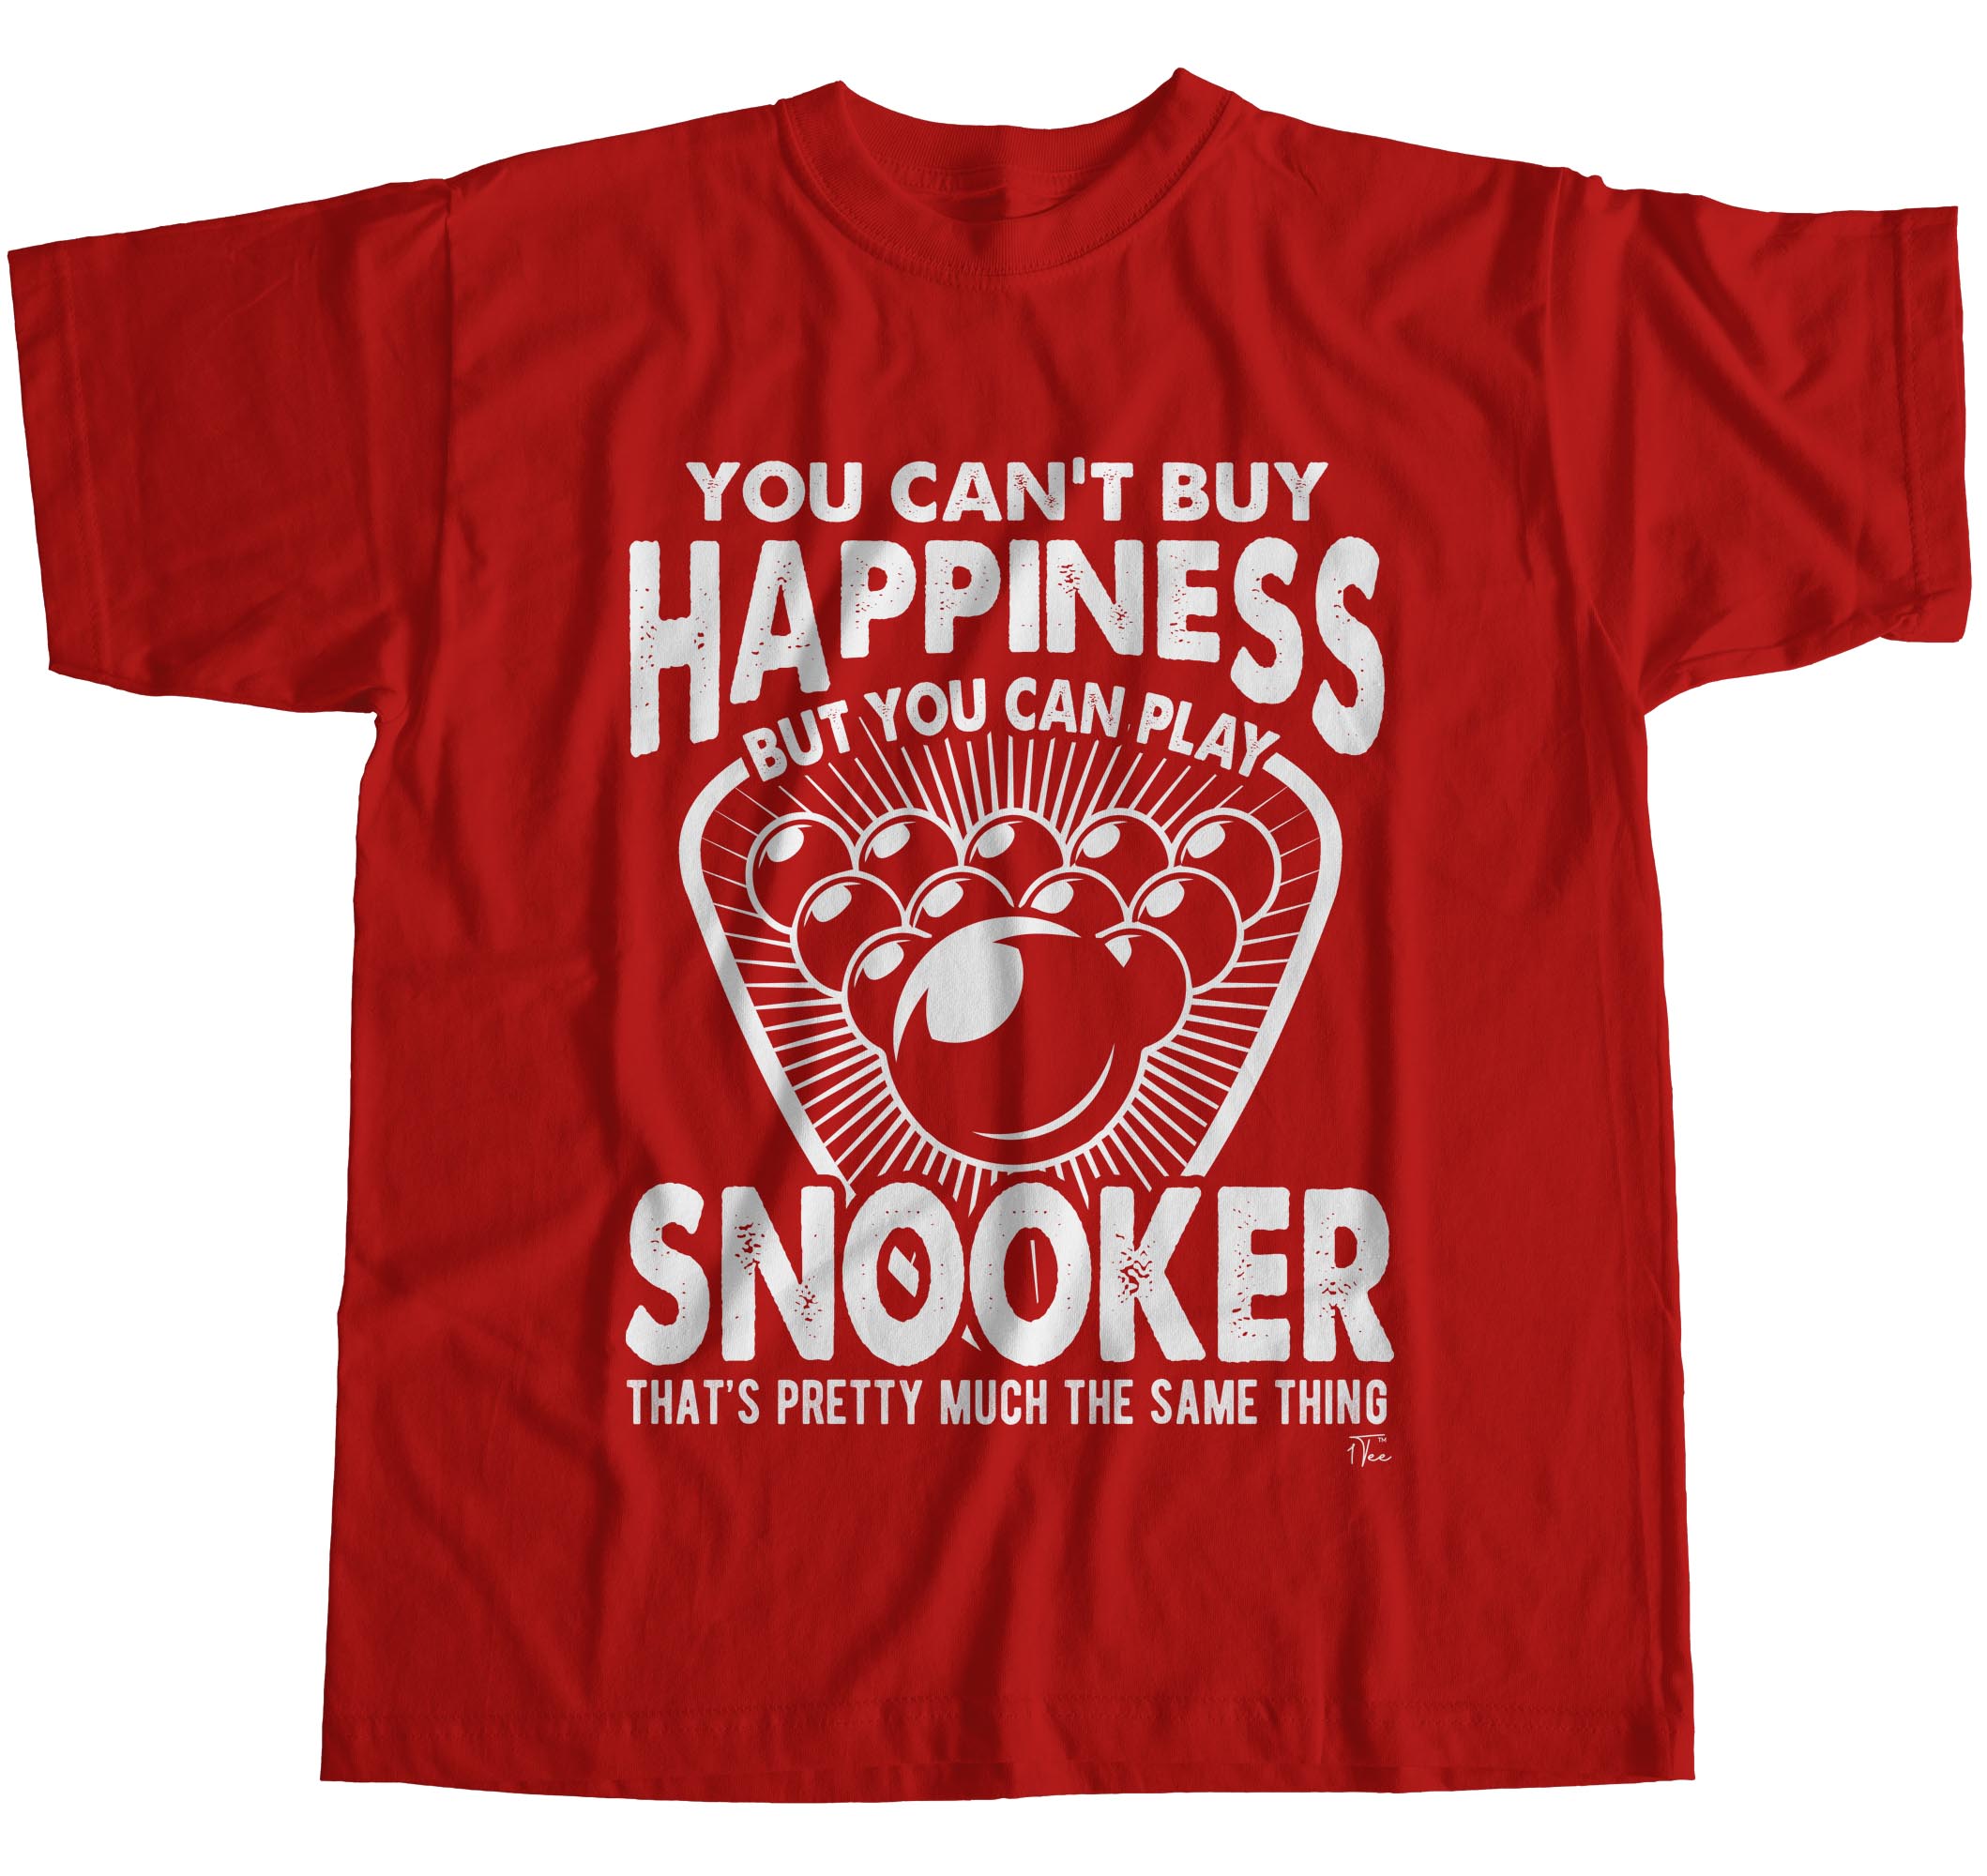 1Tee Mens You Can't Buy Happiness But You Can Play Snooker T-Shirt | eBay